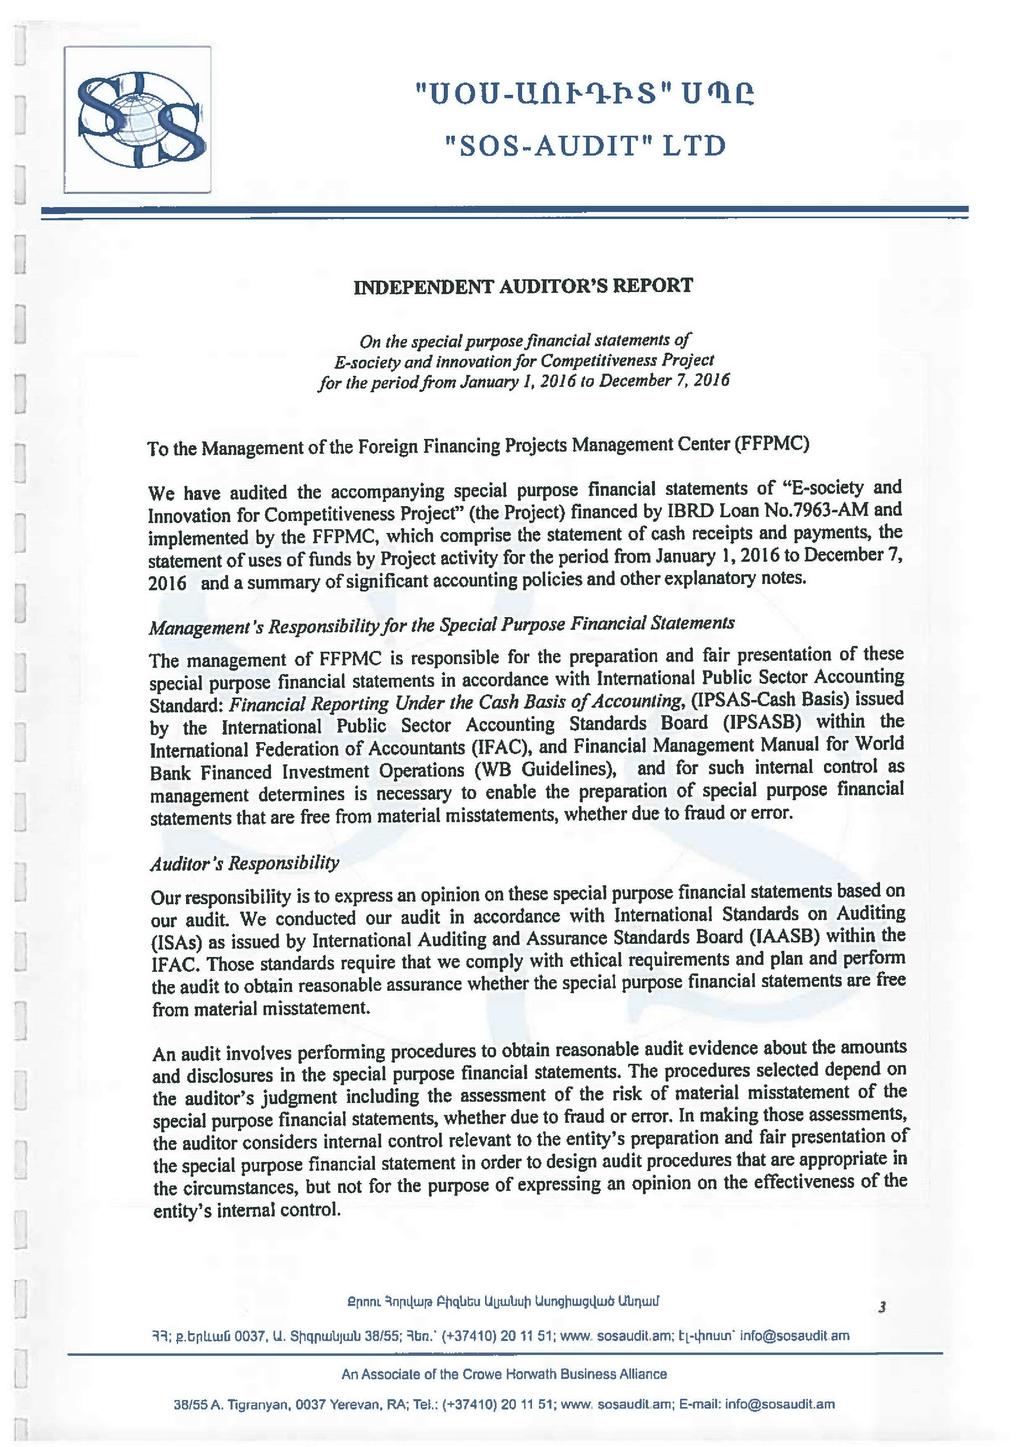 TULJMIfMaIS" UqjeQ "SOS-AUDIT" LTD INDEPENDENT AUDITOR'S REPORT On the special purpose financial statements of E-society and innovation for Competitiveness Project for the period from January 1, 2016